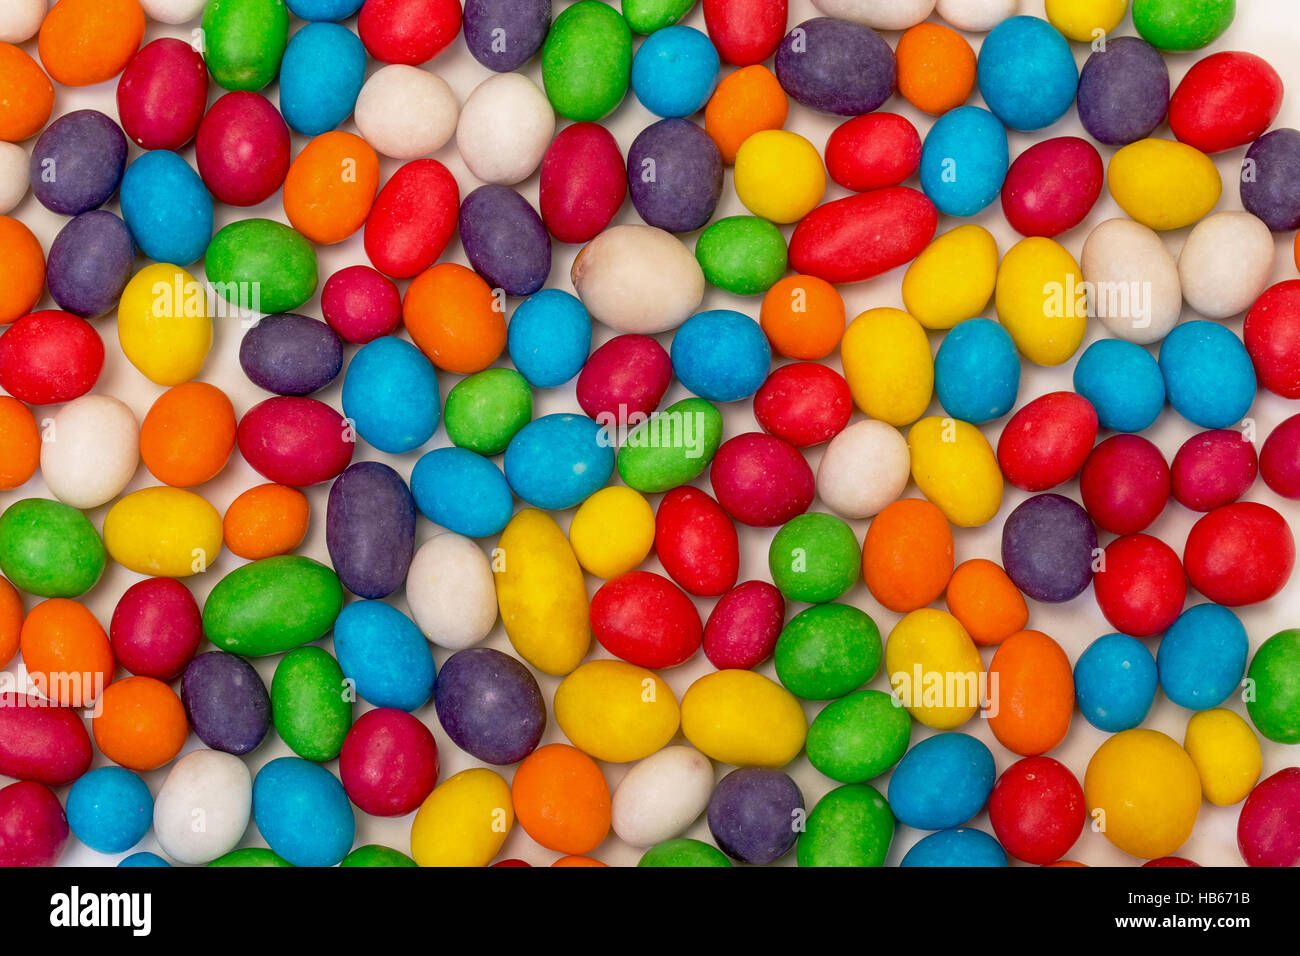 Backdrop from Multicolored Sweet Candy Stock Photo